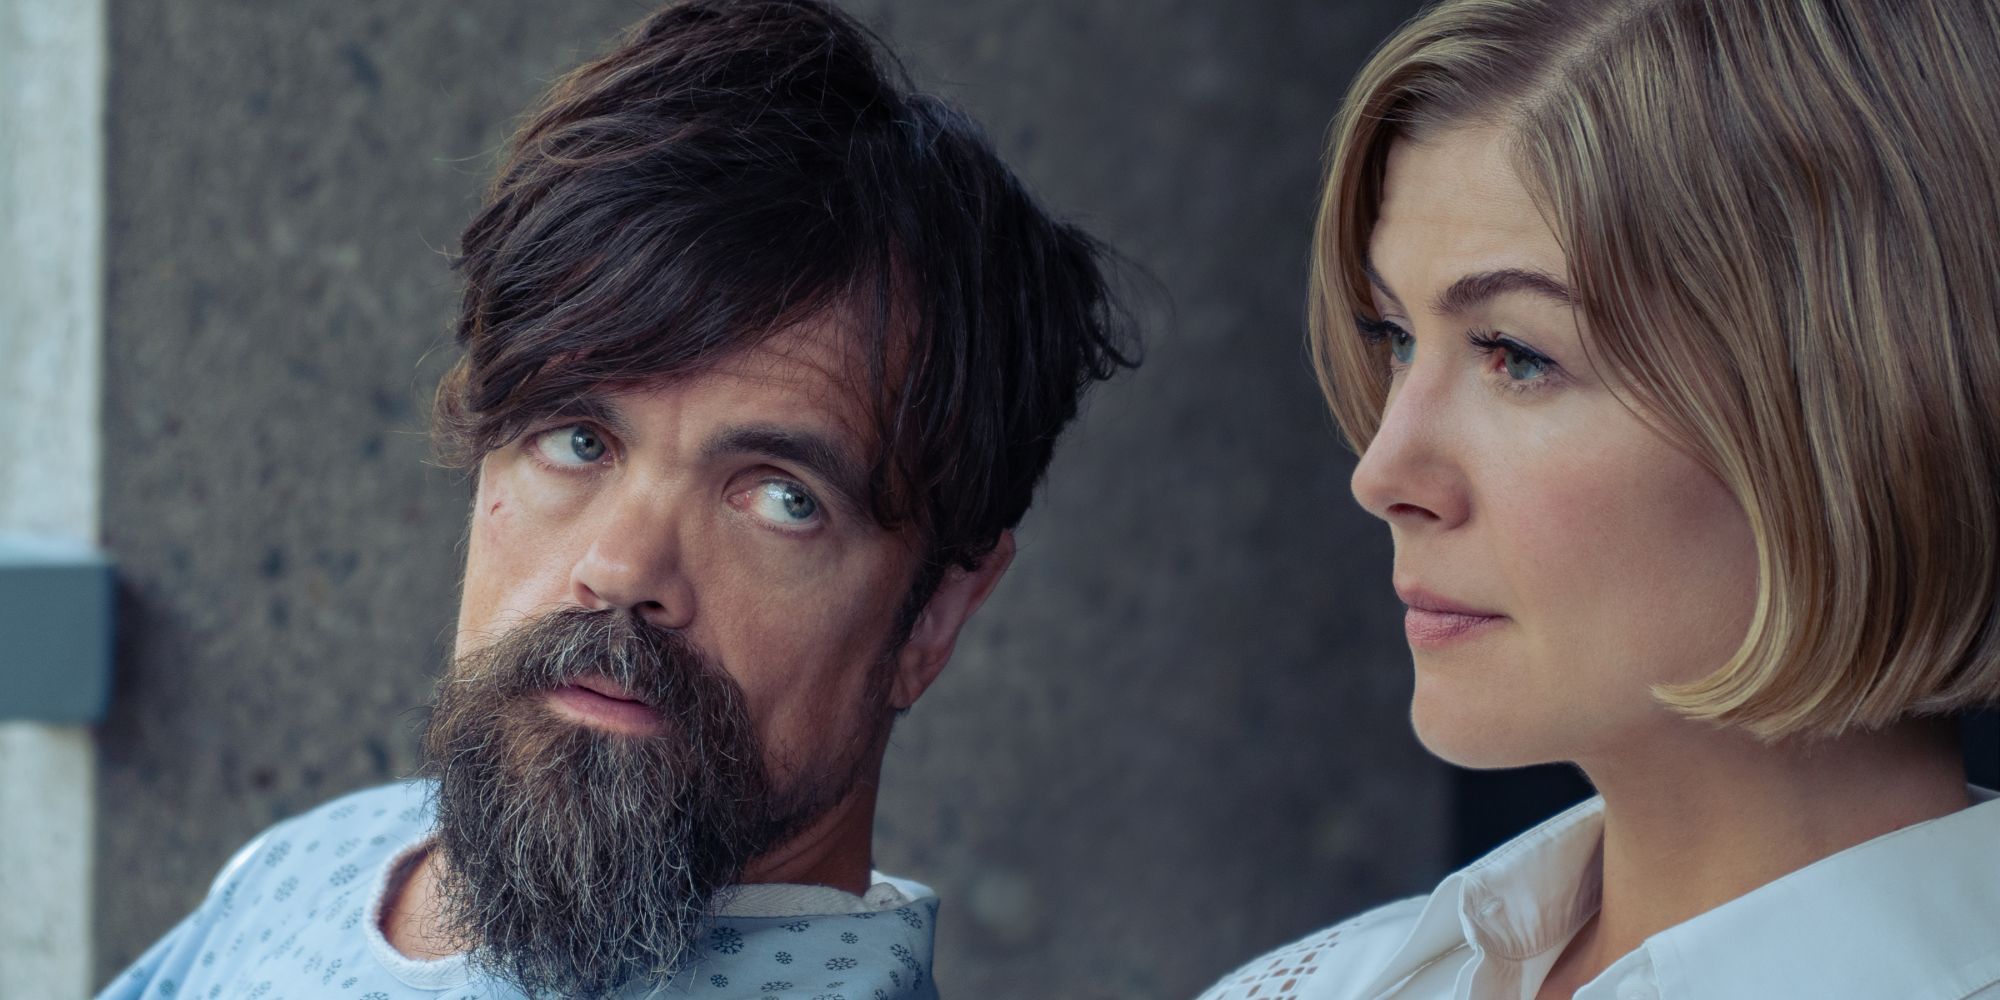 Peter Dinkalge sits next to Rosamund Pike and talks to her